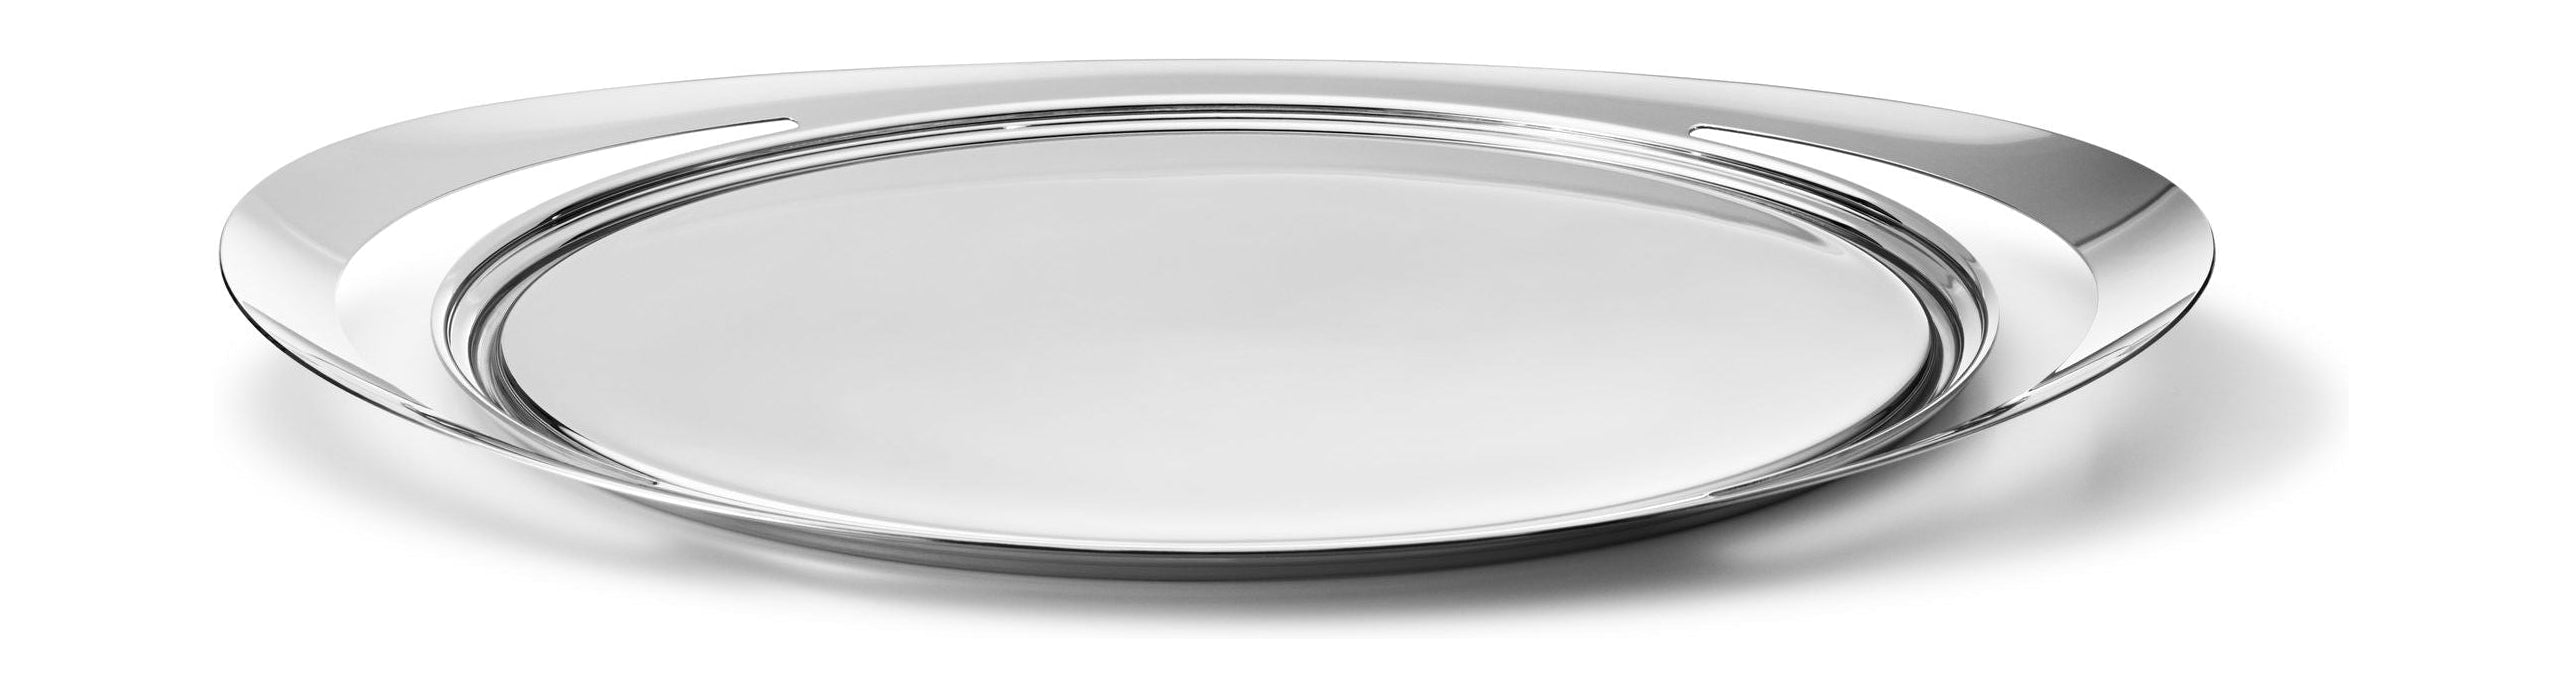 Georg Jensen Cobra Serving Tray With Leather Insert